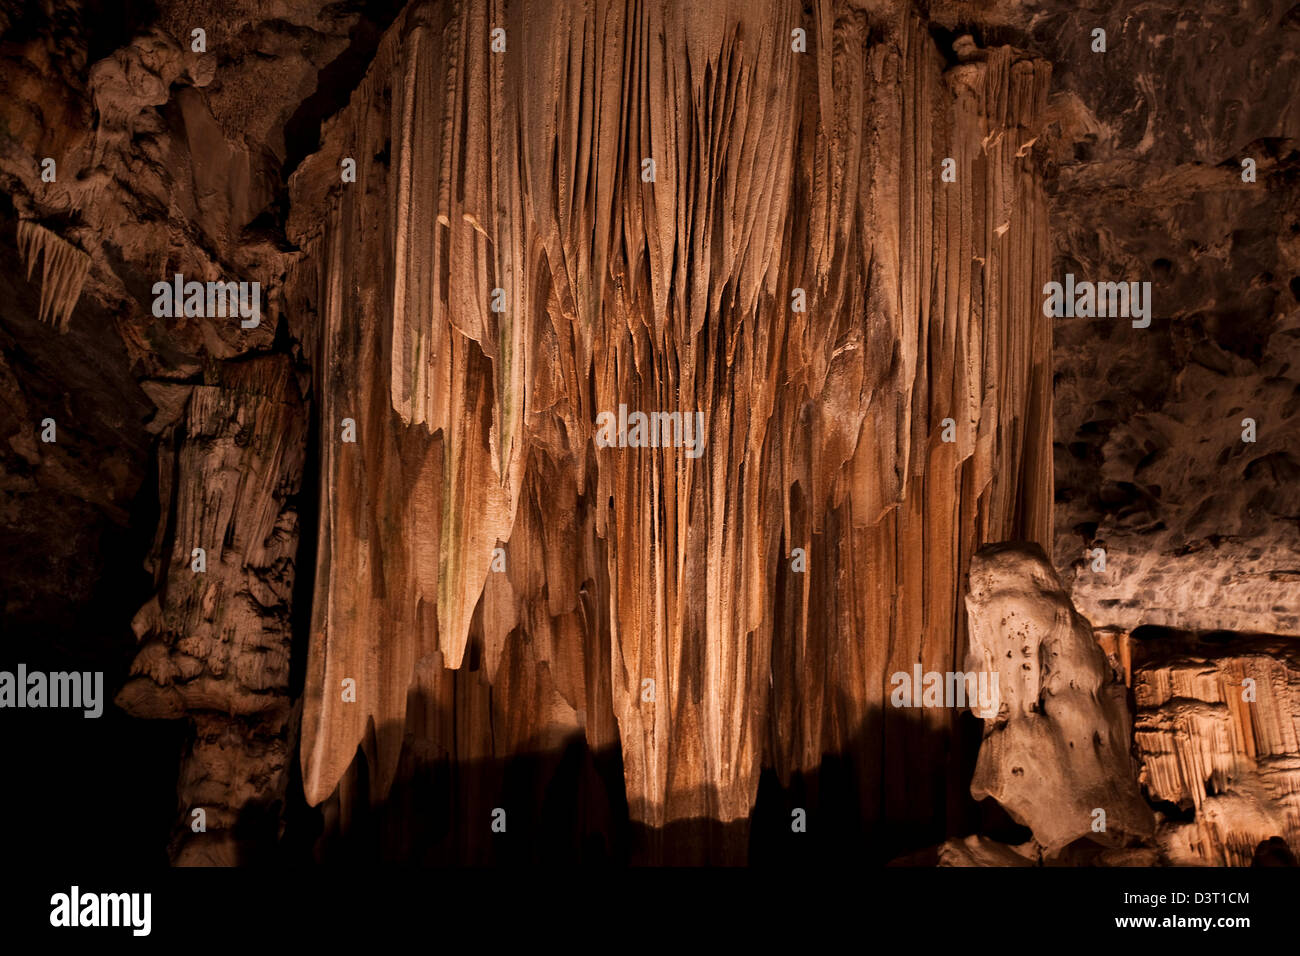 Stalactites in the Cango Caves, Oudtshoorn, South Africa Stock Photo